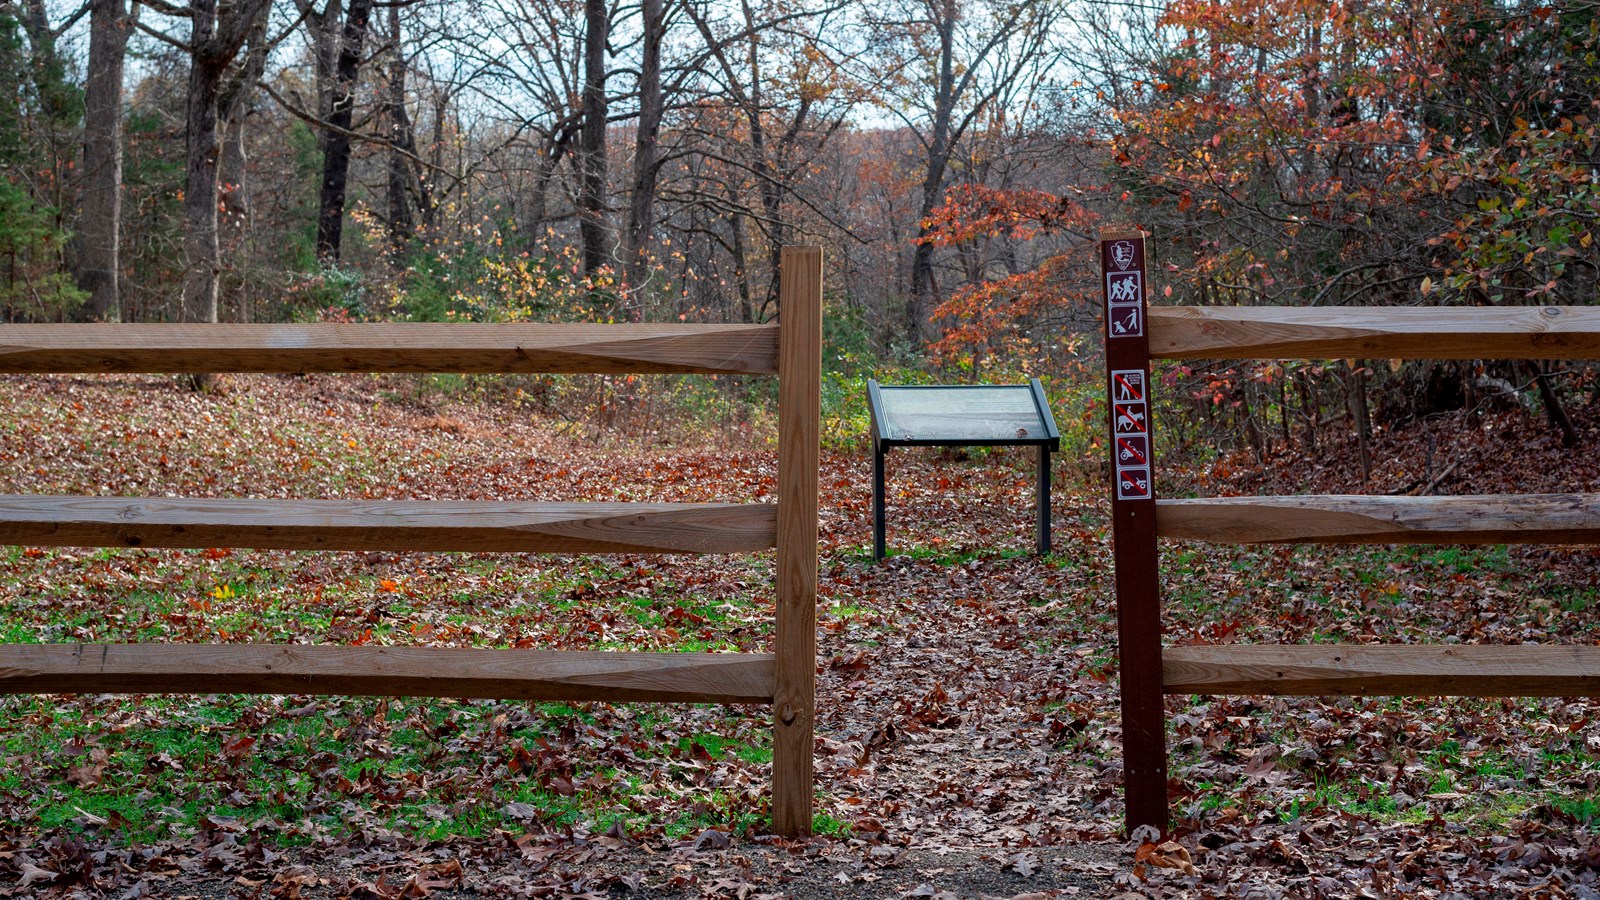 A break in two wooden fences leading to a trail through the woods in fall.